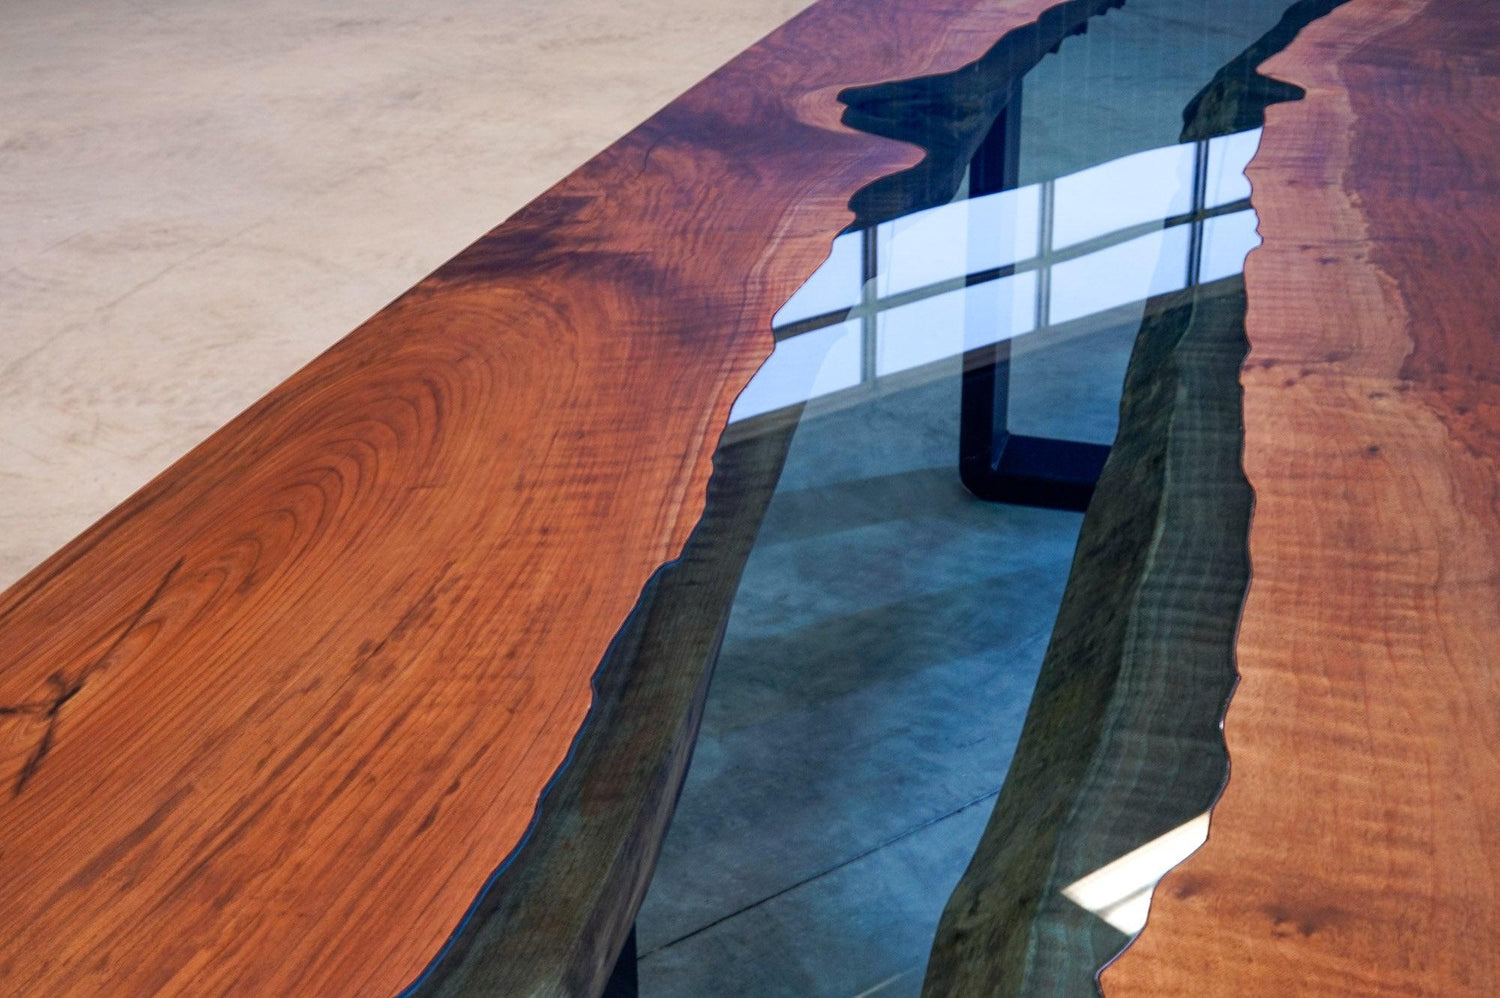 Looking down at the glass river of a custom river table, with reflections of windows in the blue tempered glass.